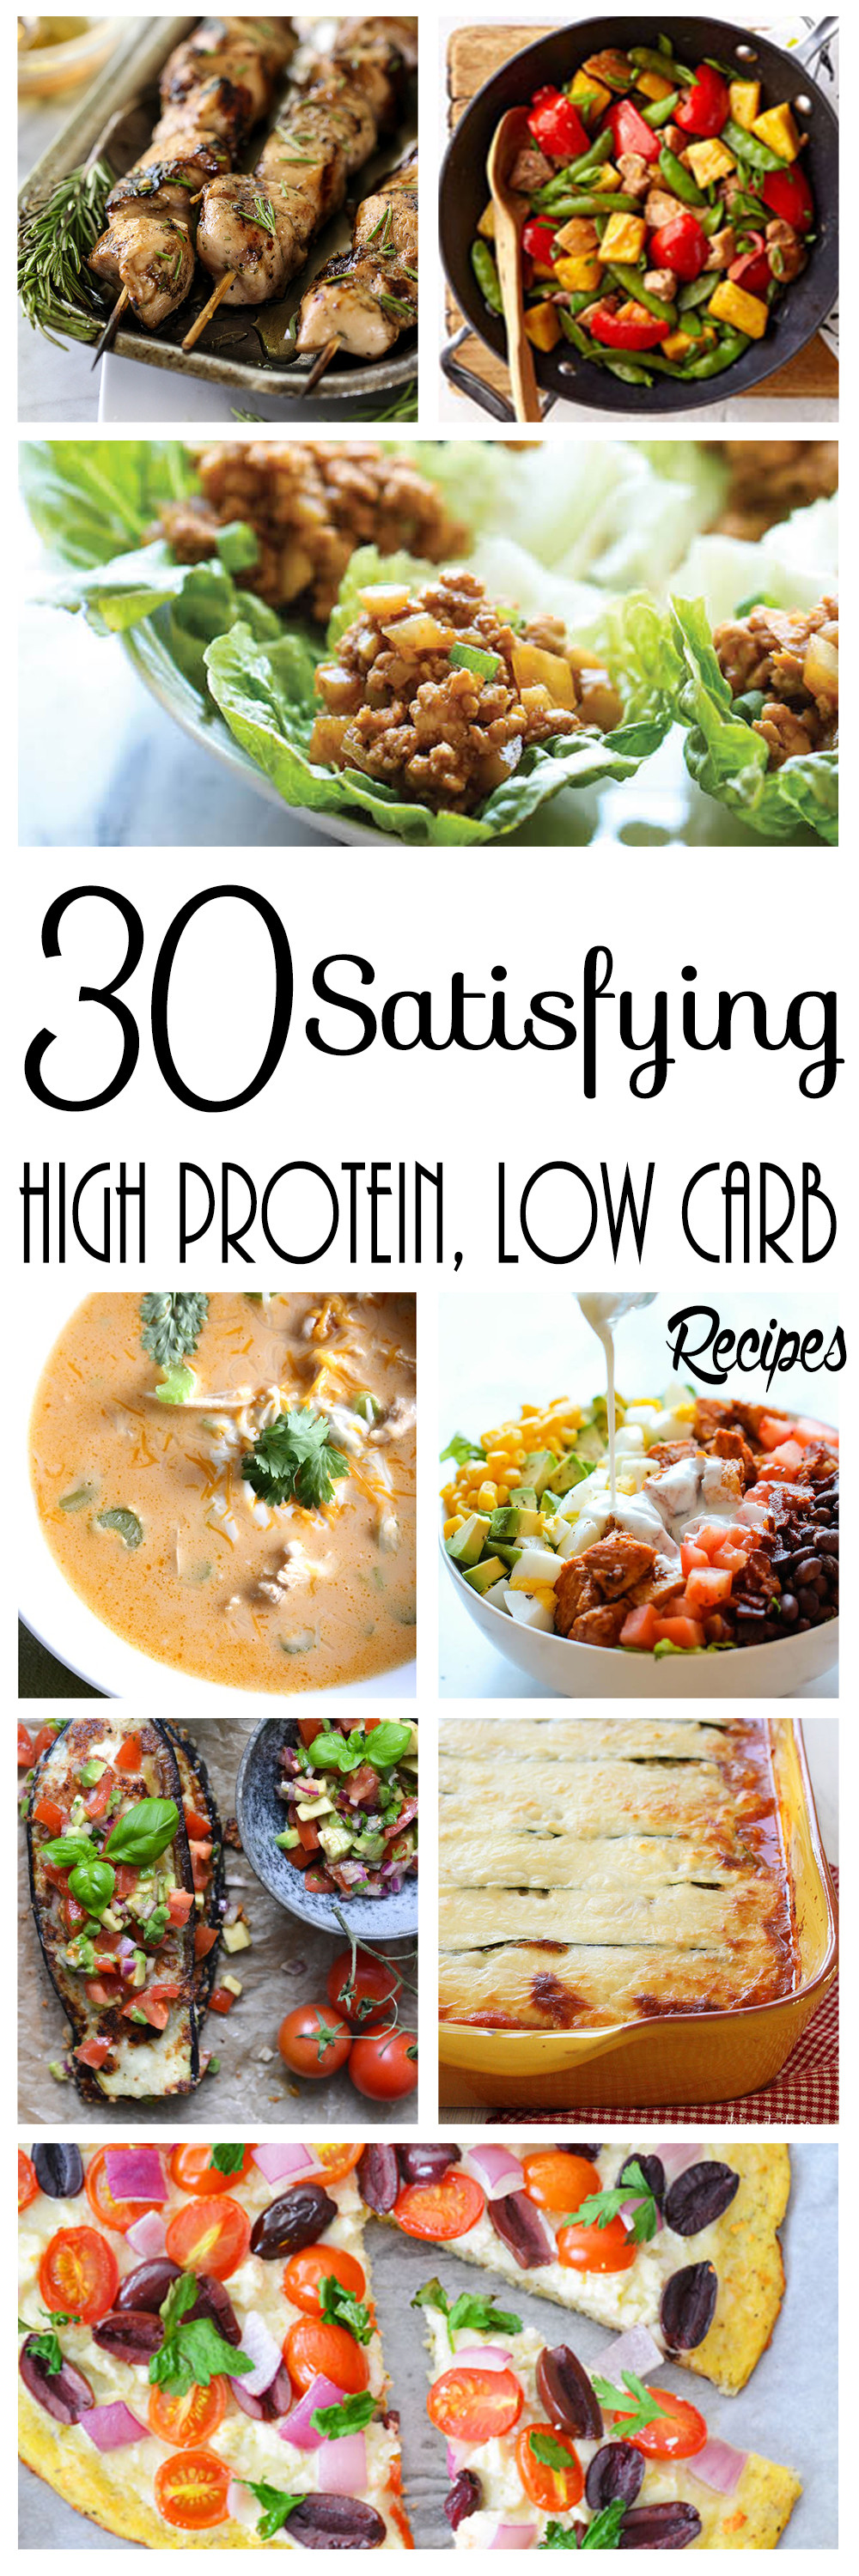 Healthy Low Carb High Protein Recipes
 30 Satisfying High Protein Low Carb Recipes FULL